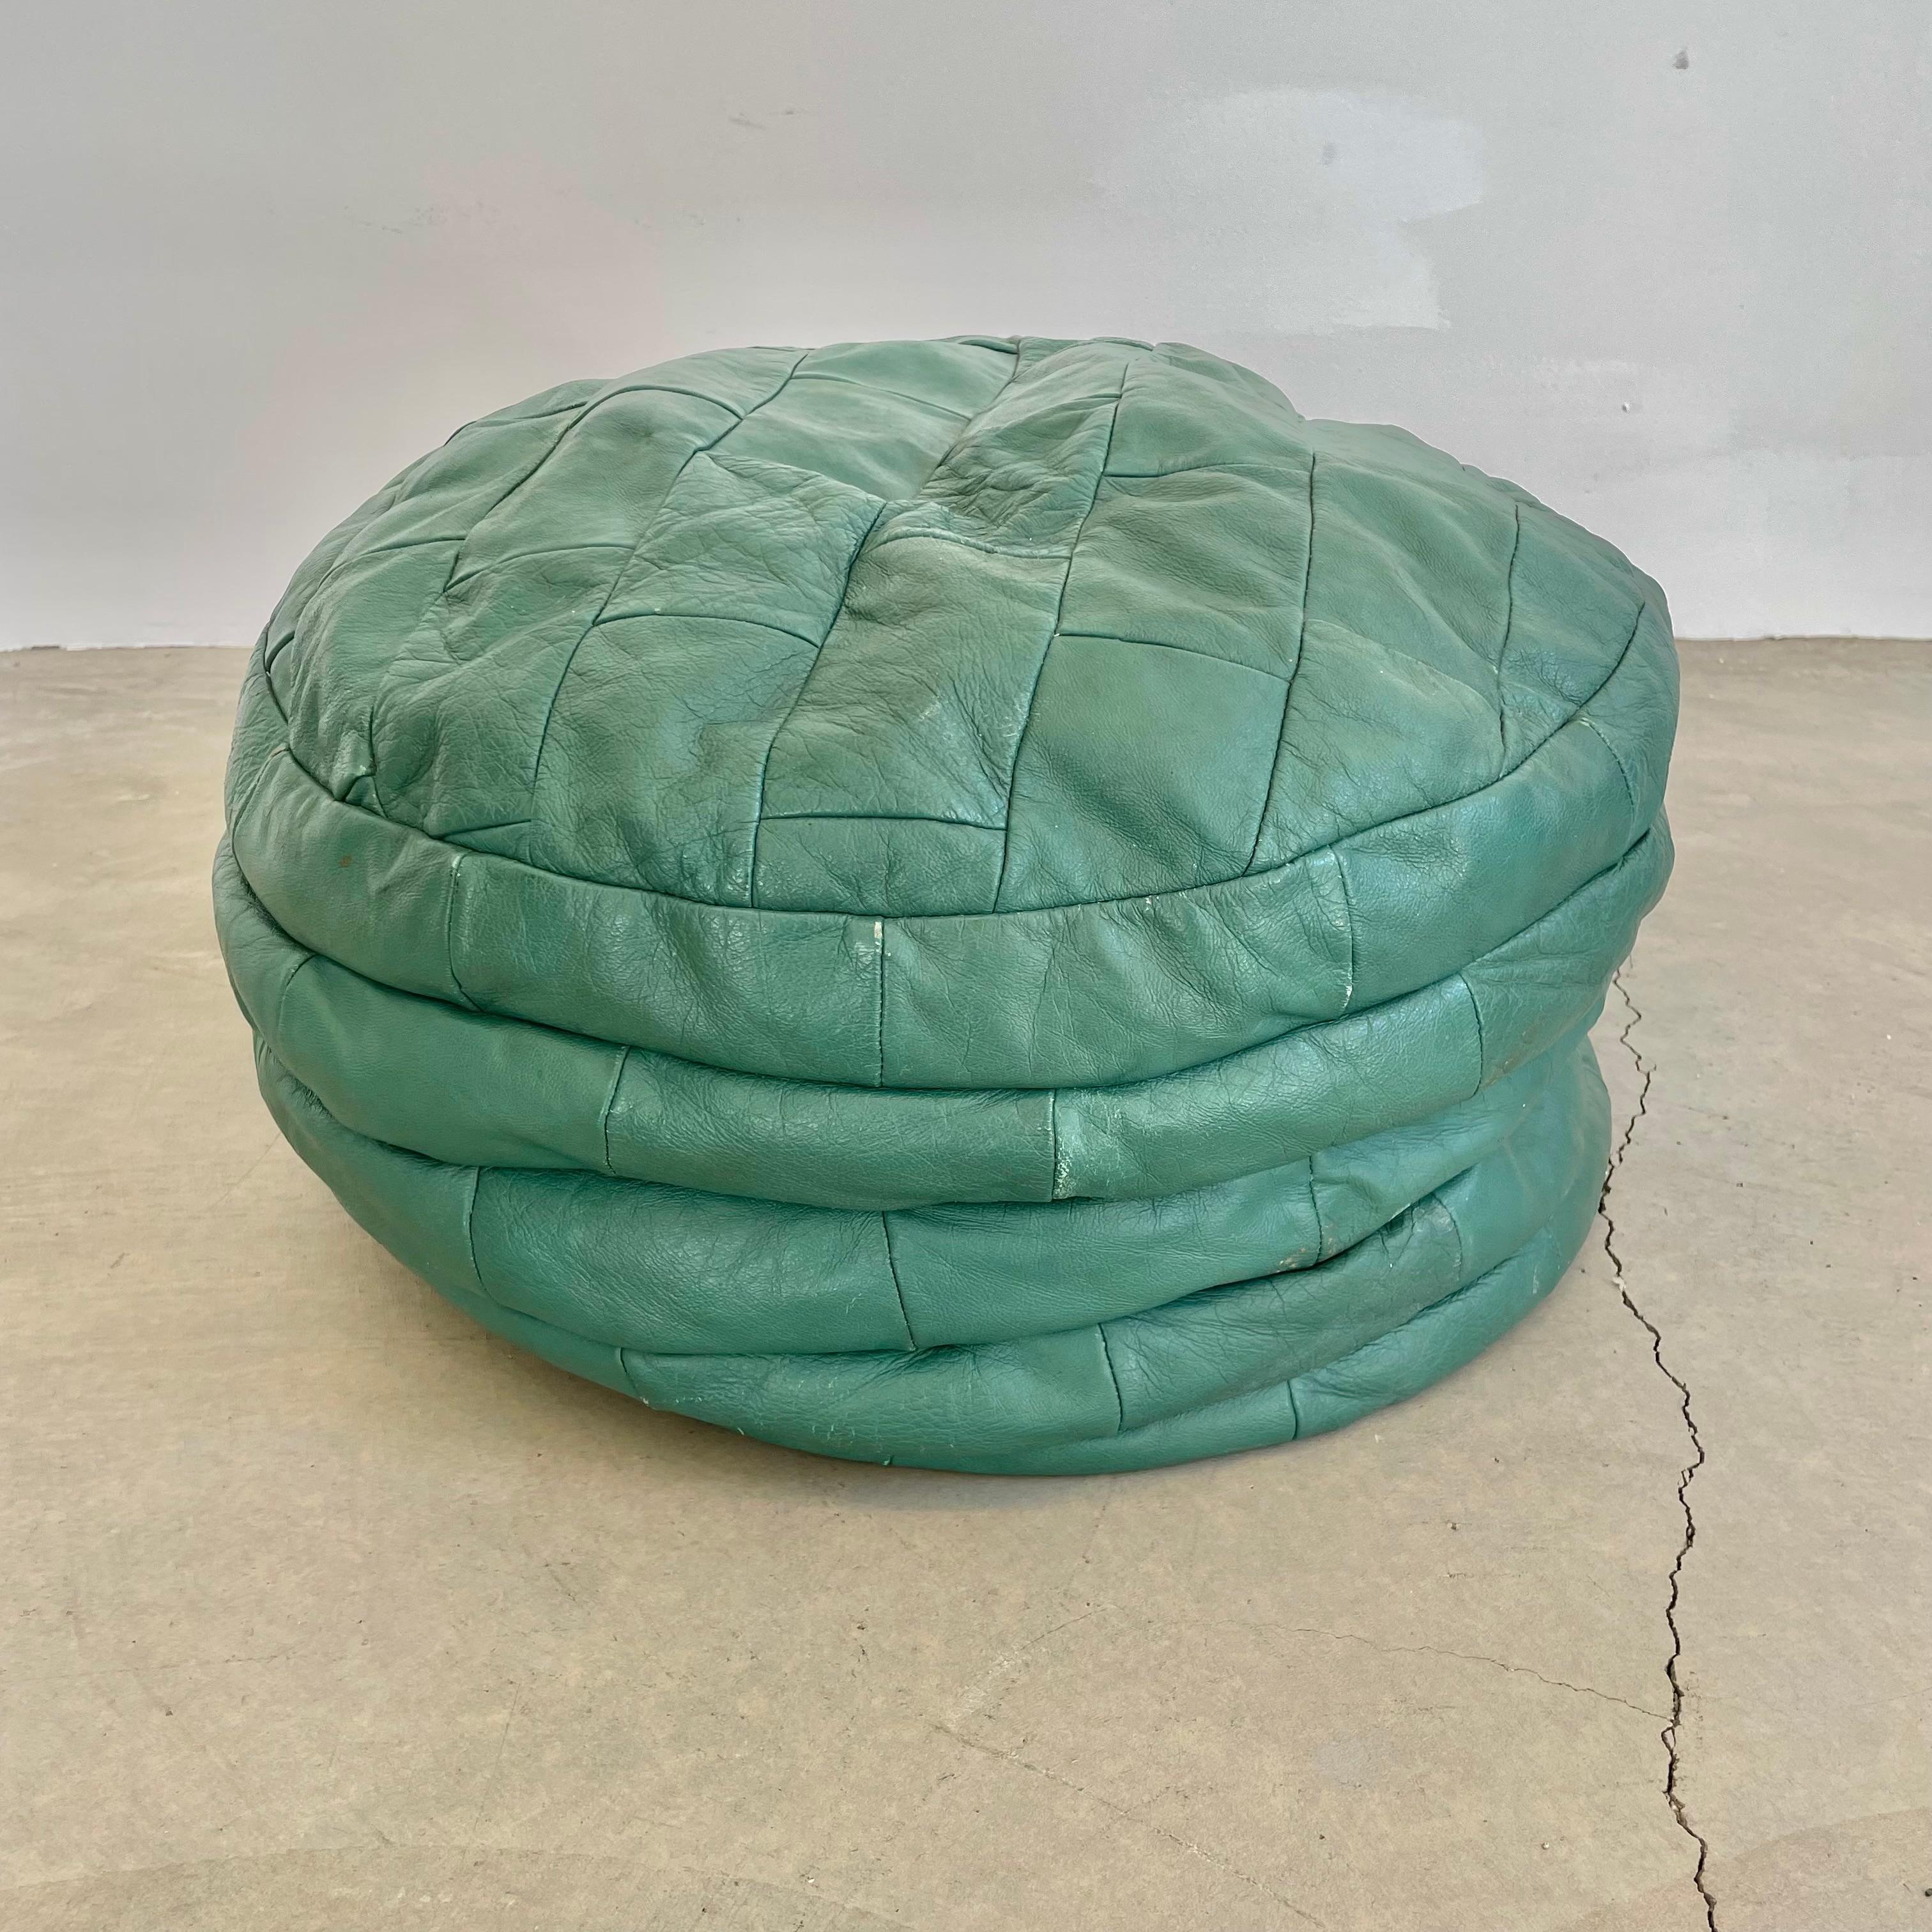 Late 20th Century De Sede Mint Green Leather Patchwork Ottoman, 1970s Switzerland For Sale